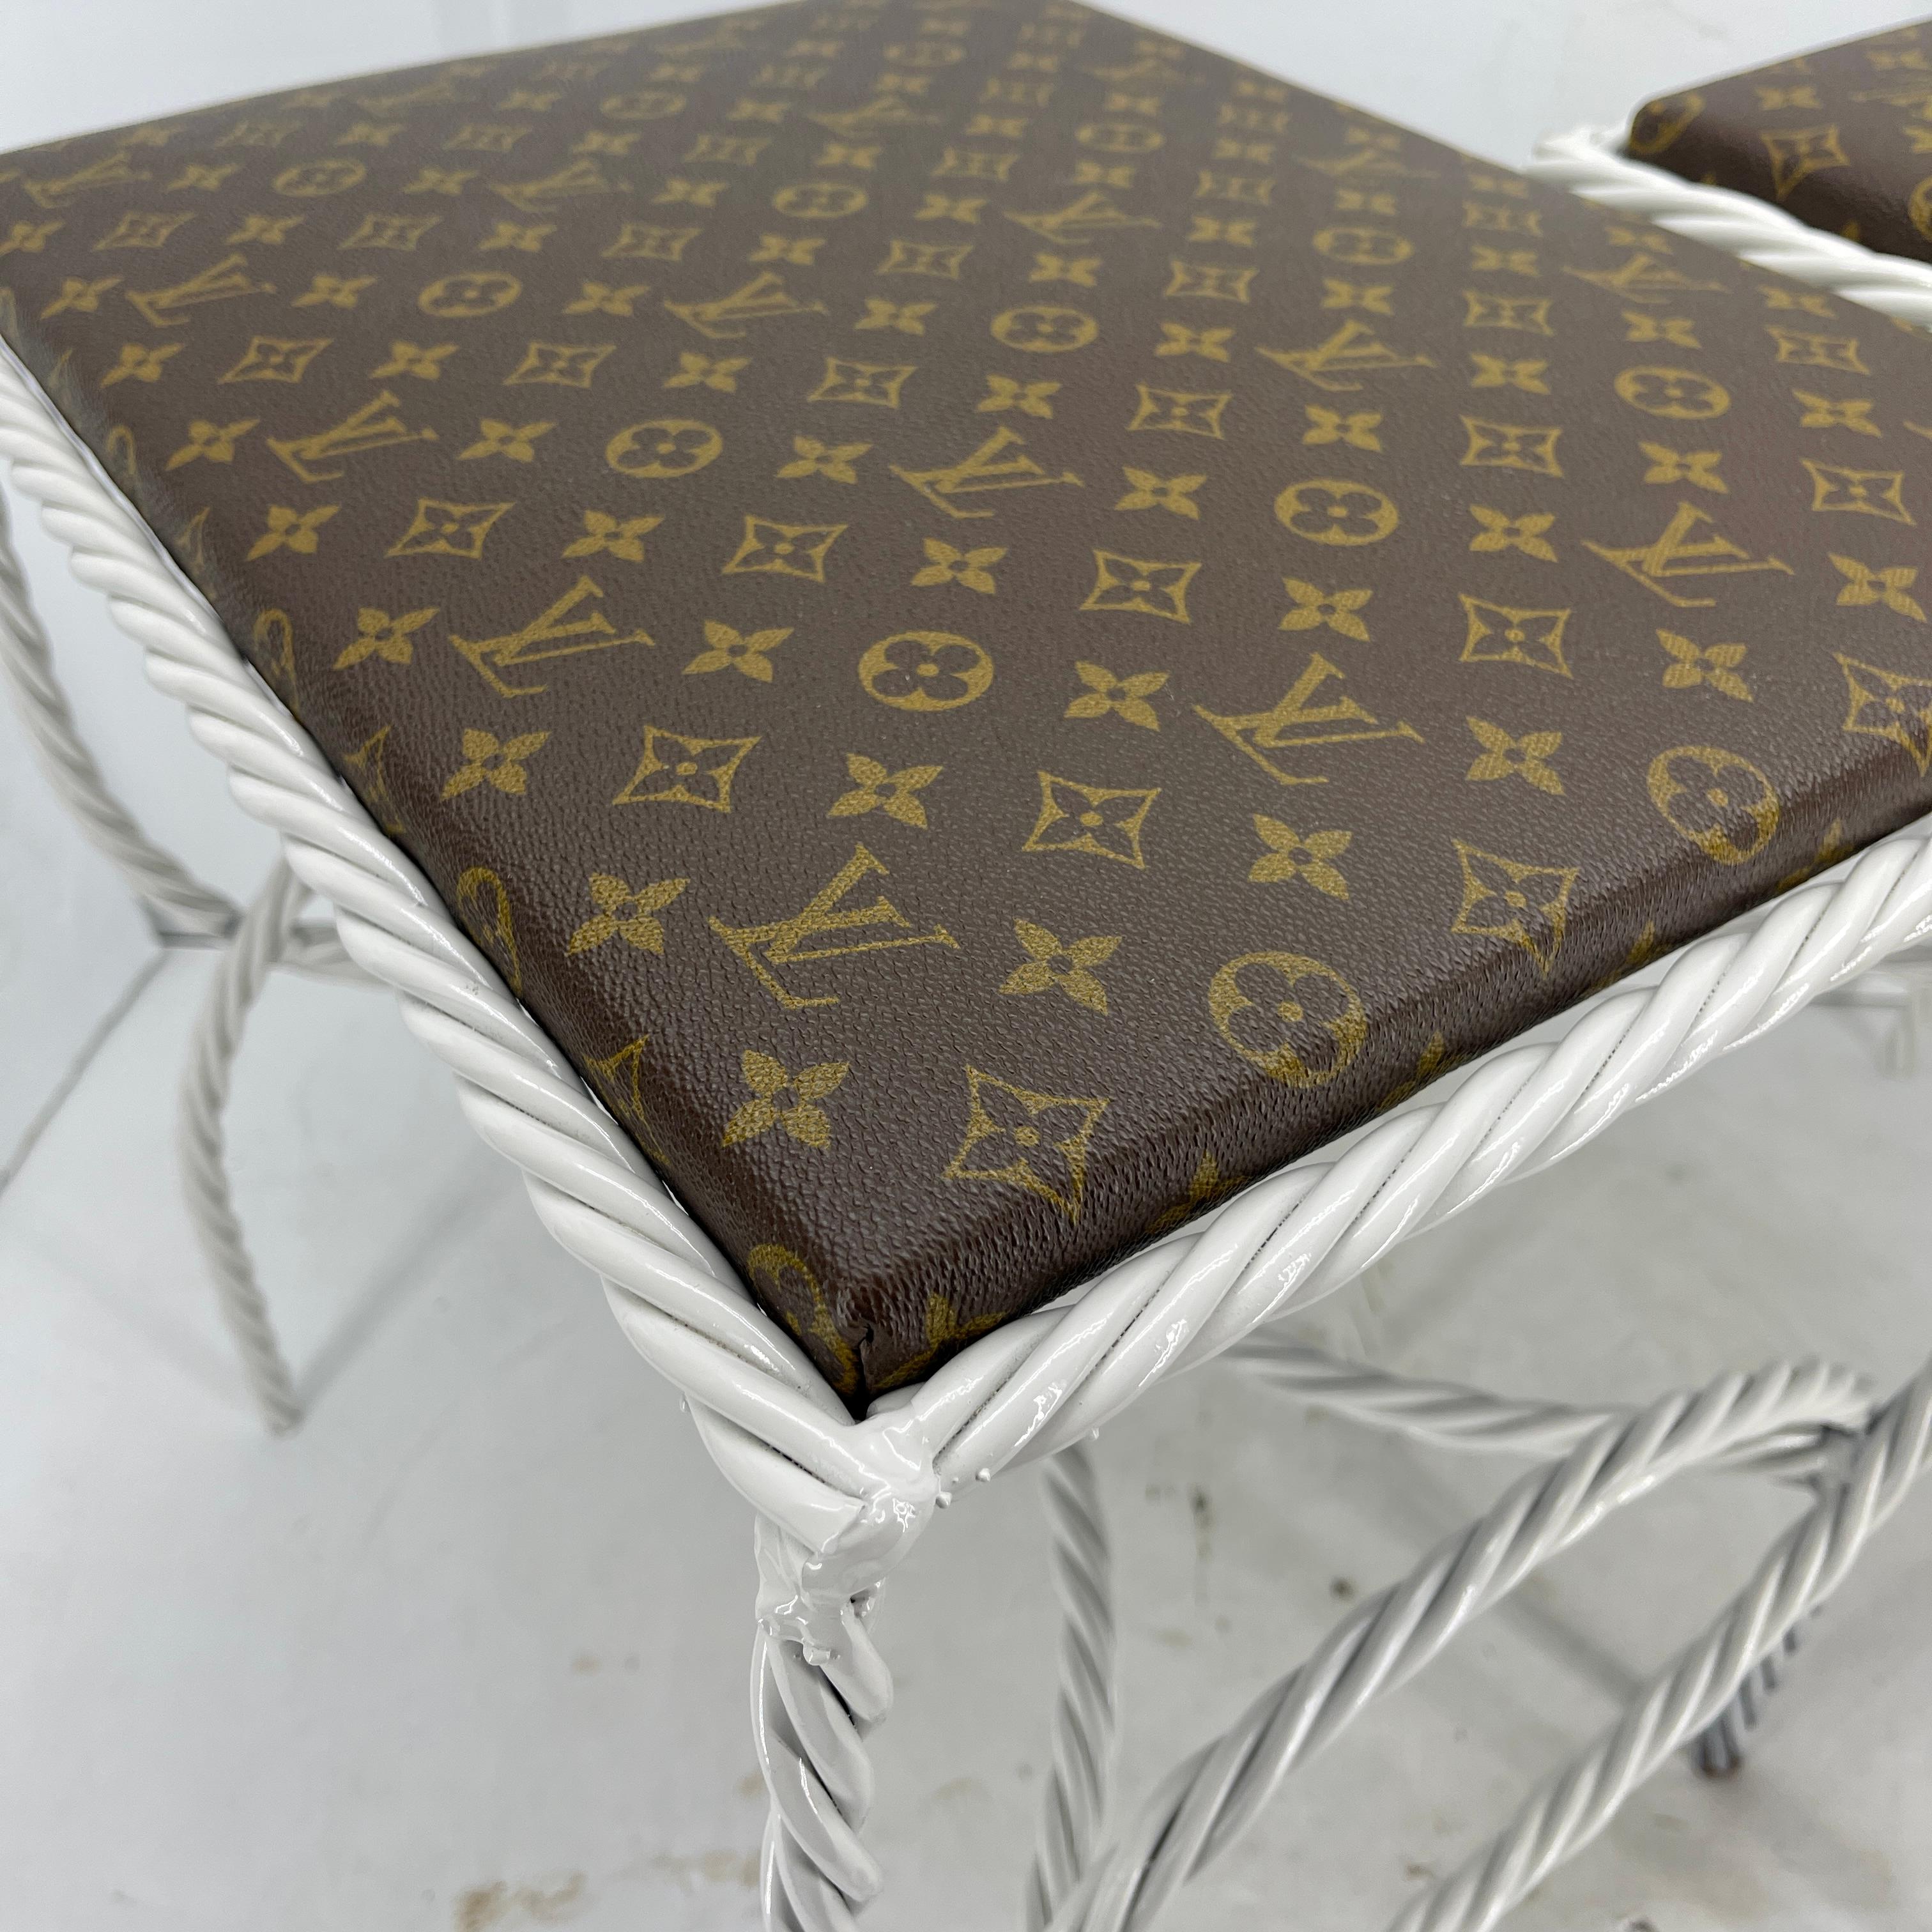 Pair of Roped Iron Benches Side Tables with Louis Vuitton Monogram Fabric For Sale 7